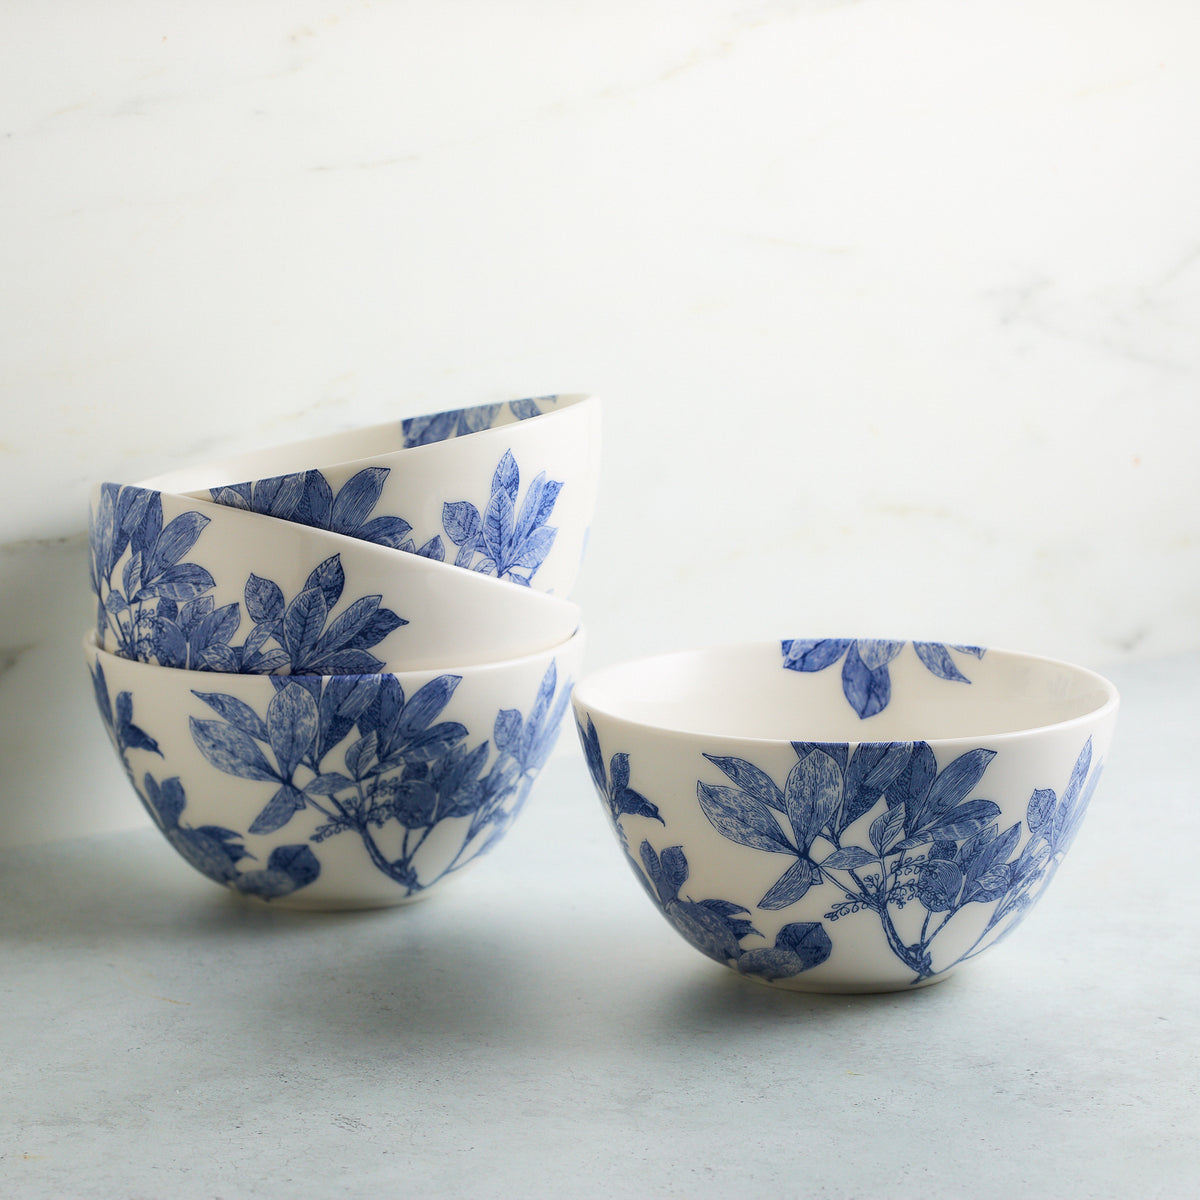 Four premium Arbor Cereal Bowls by Caskata with blue floral patterns stacked and arranged on a light gray surface against a white background.